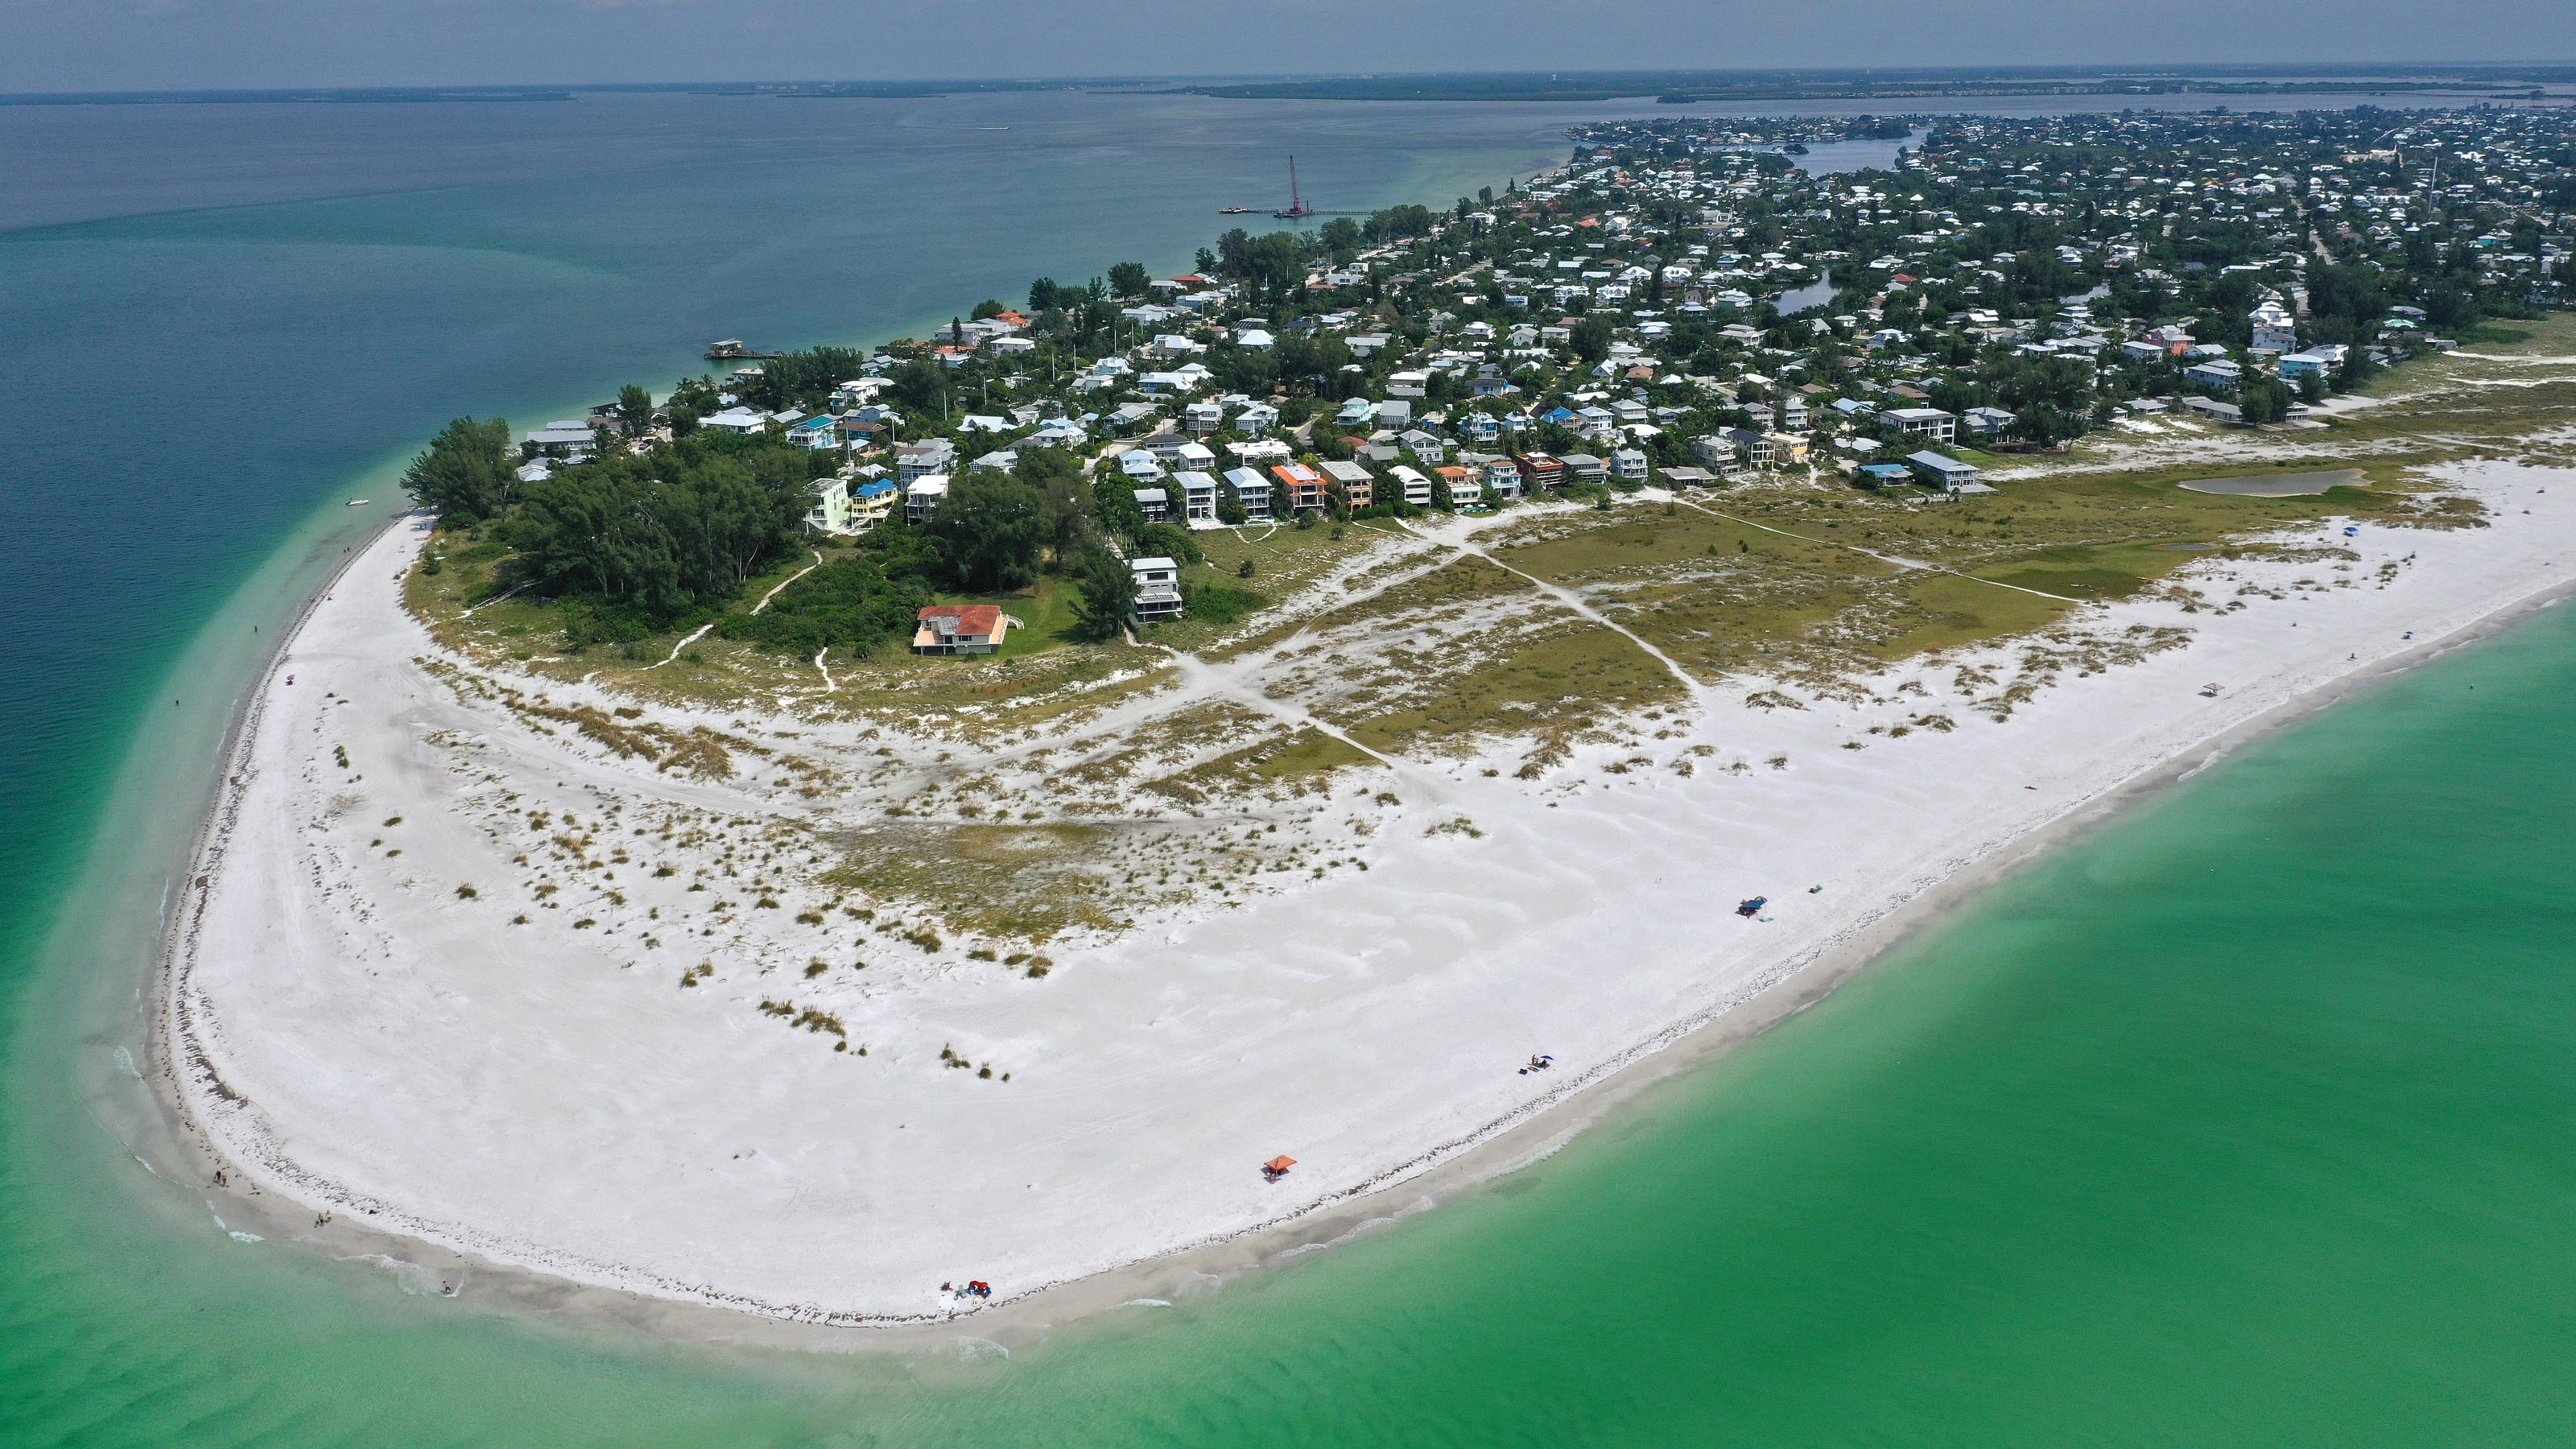 Most Charming Small Towns in Florida Anna Maria Island